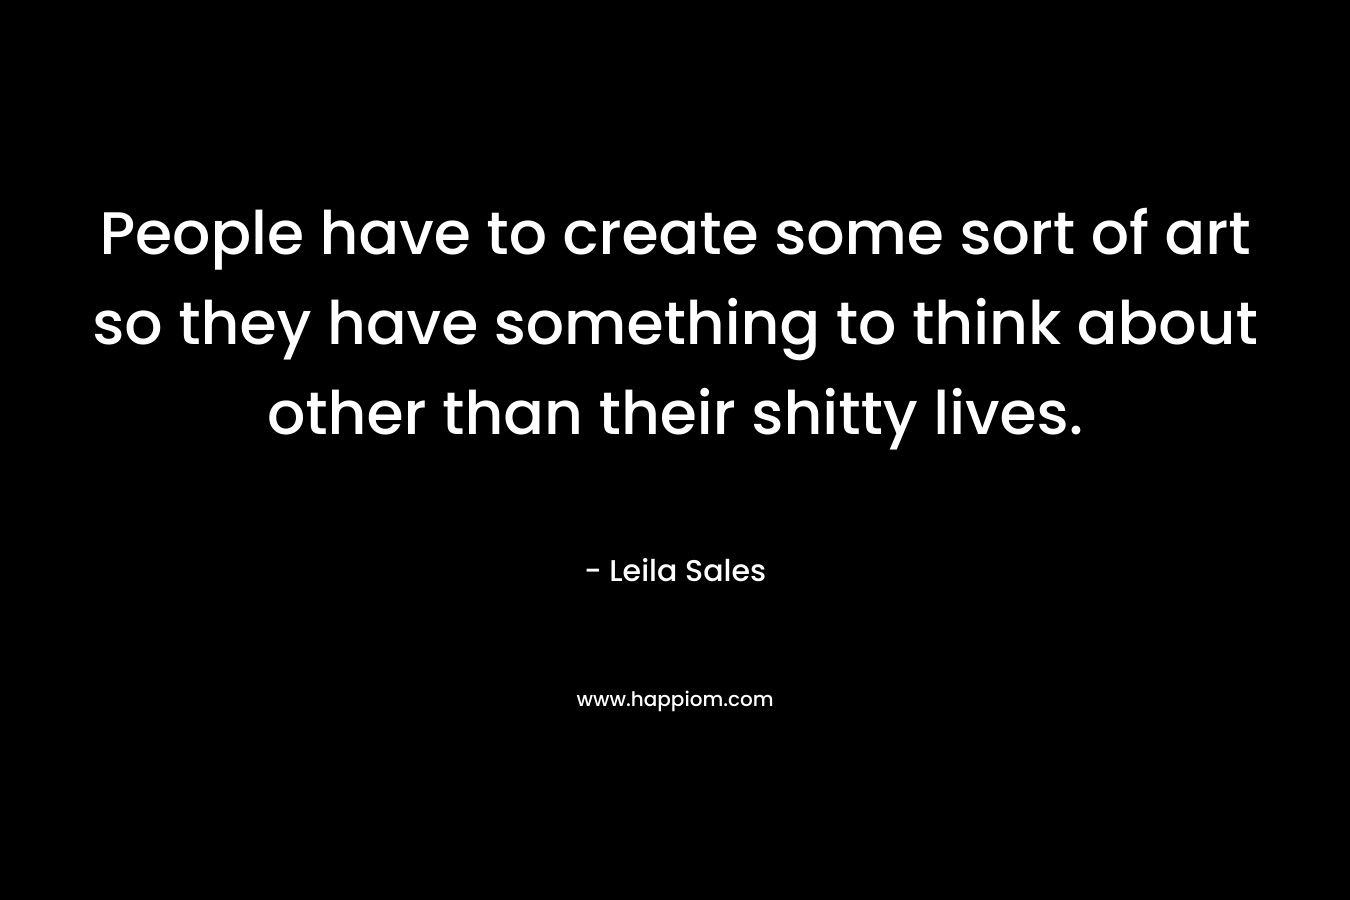 People have to create some sort of art so they have something to think about other than their shitty lives. – Leila Sales